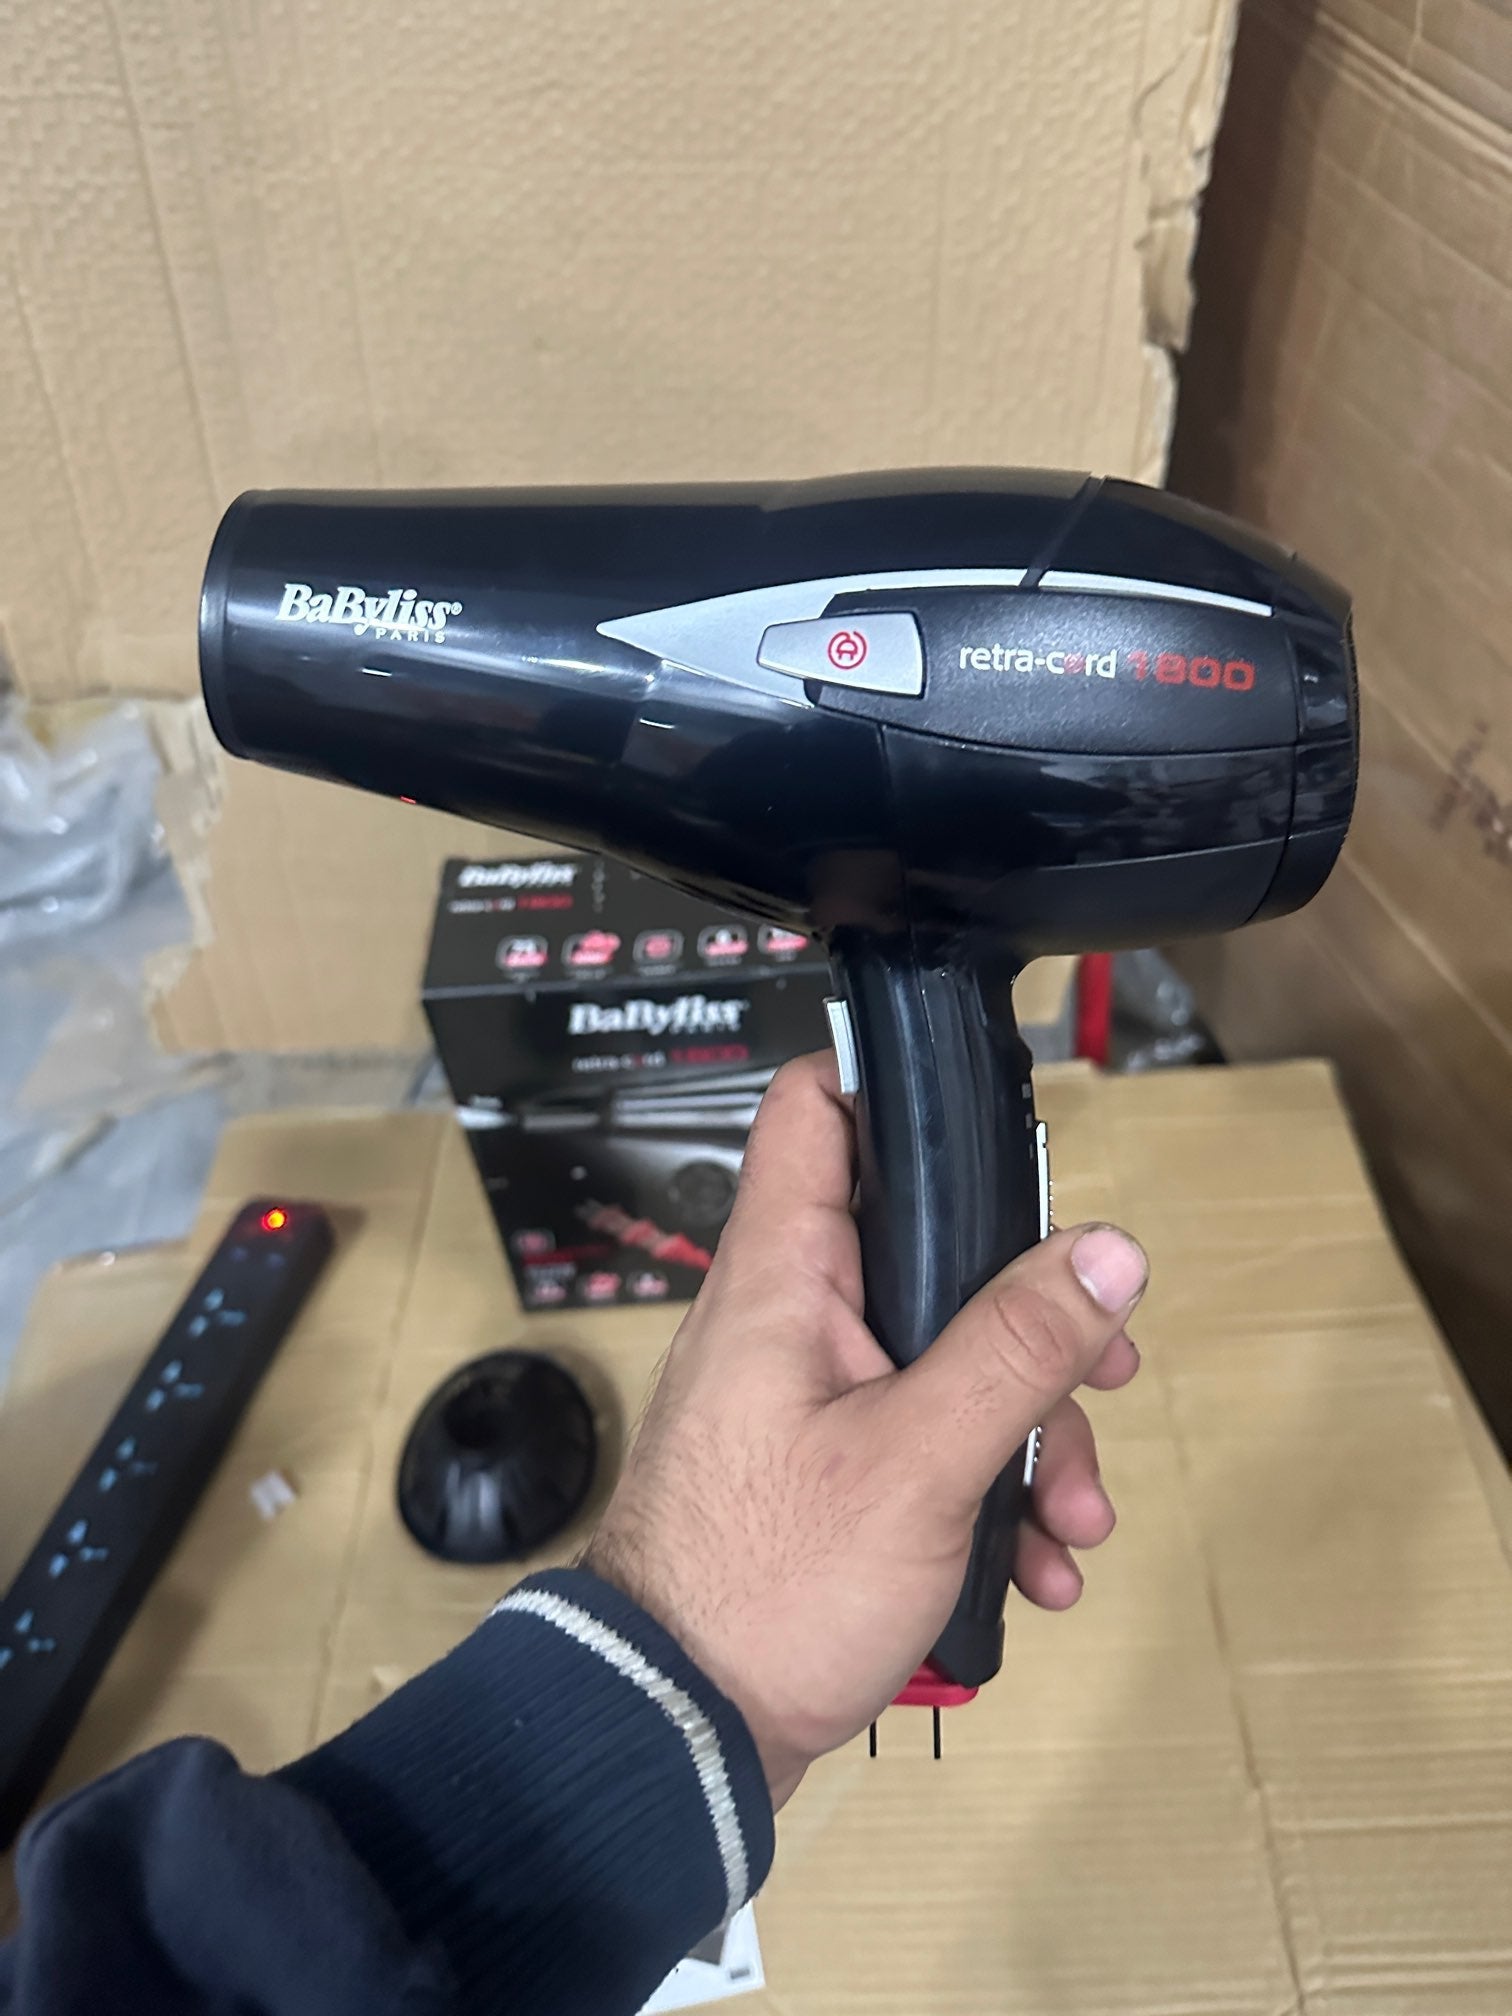 USA LOT Babyliss hairdryer Retra-cord 1800